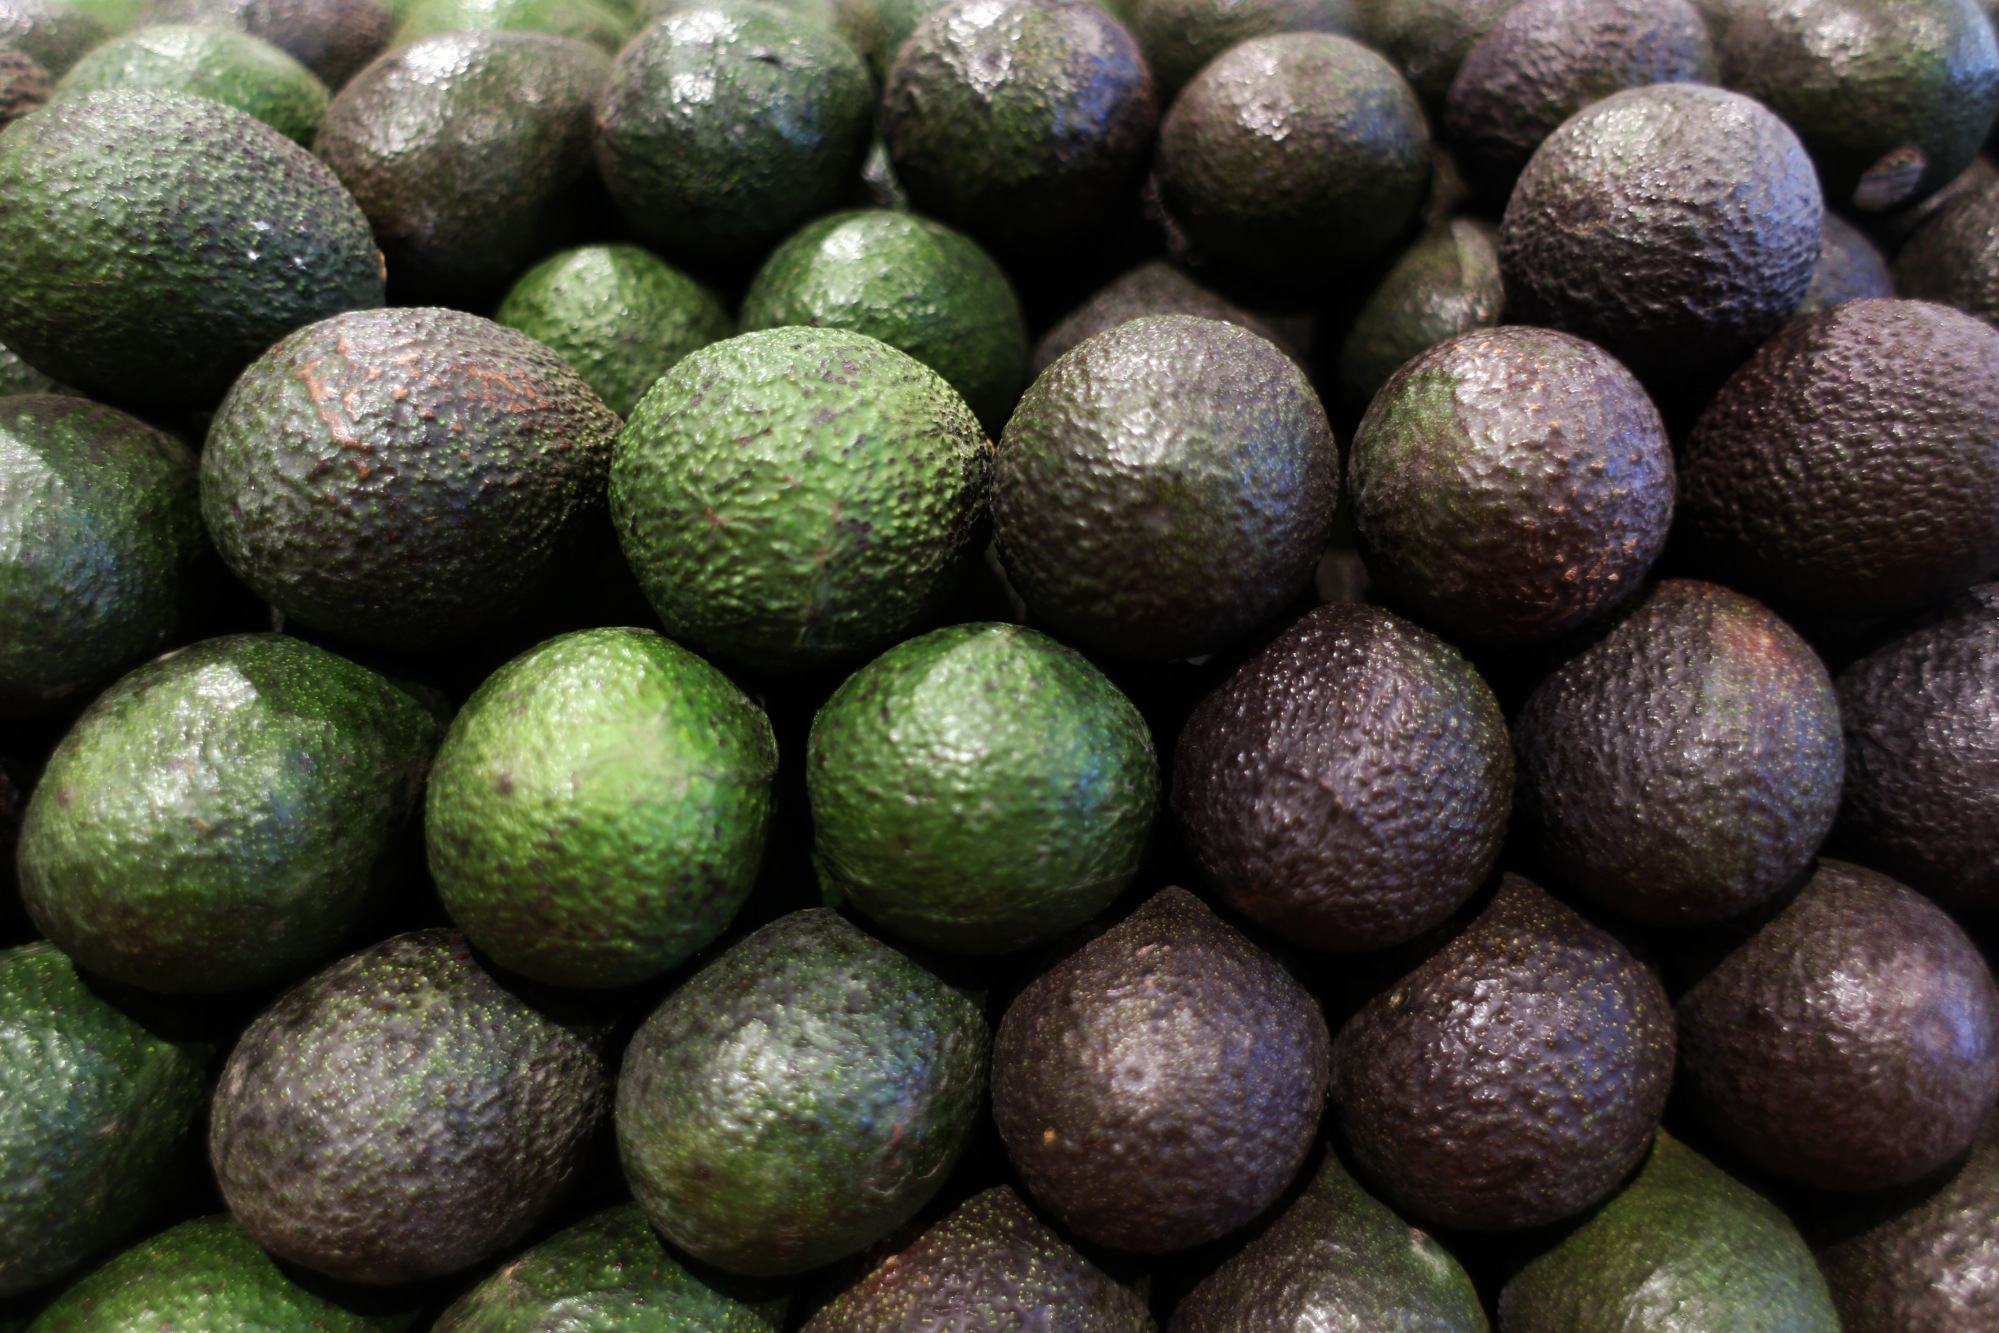 Avocados sit on display for sale during the grand opening of a Whole Foods Market Inc. location.